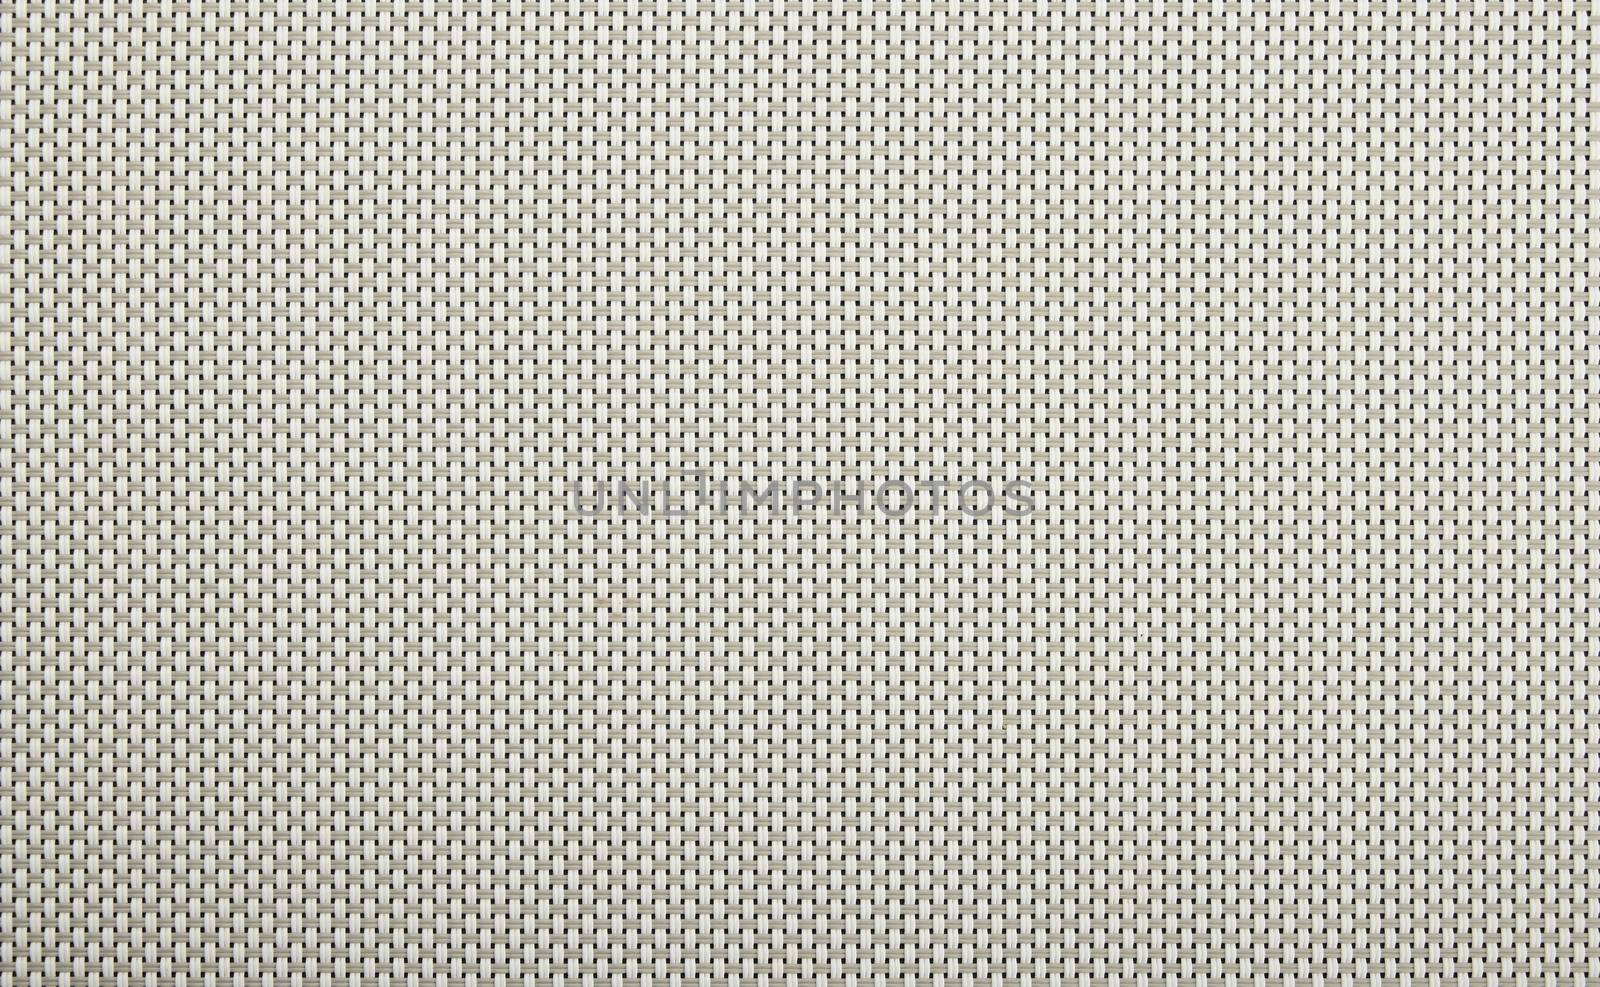 Background texture of horizontal gray and vertical white wicker braided plastic double strings with small mesh and black back